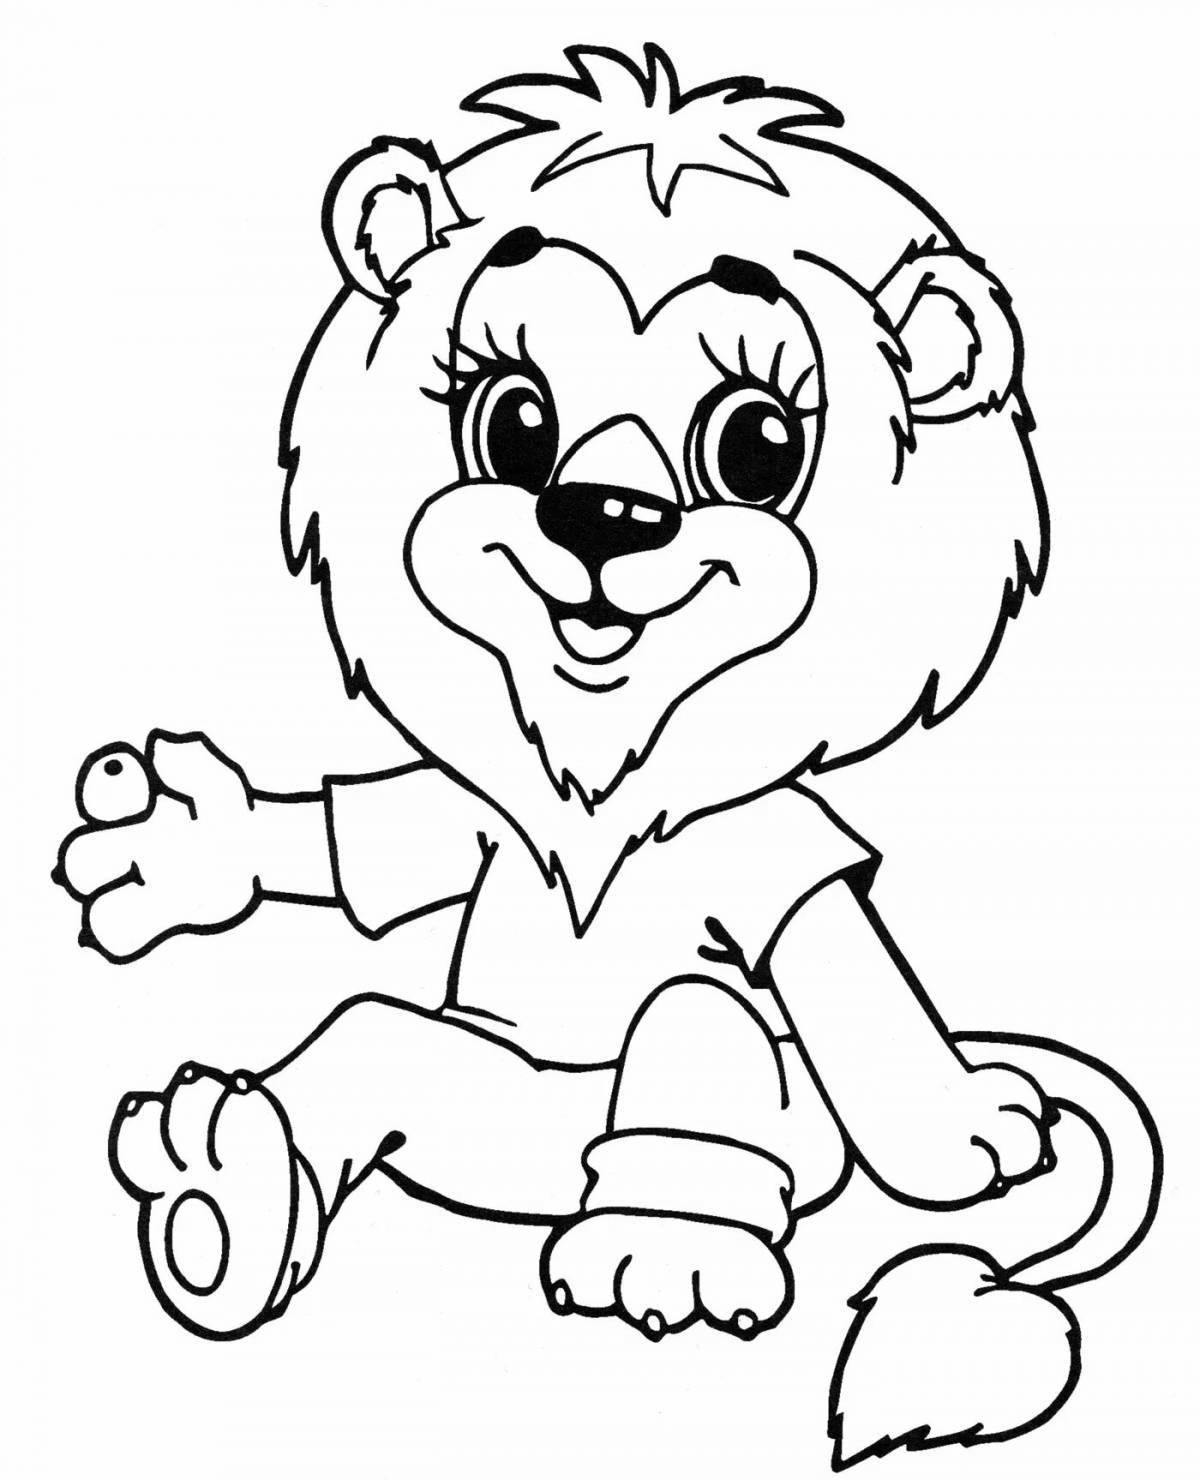 Great lion coloring for kids